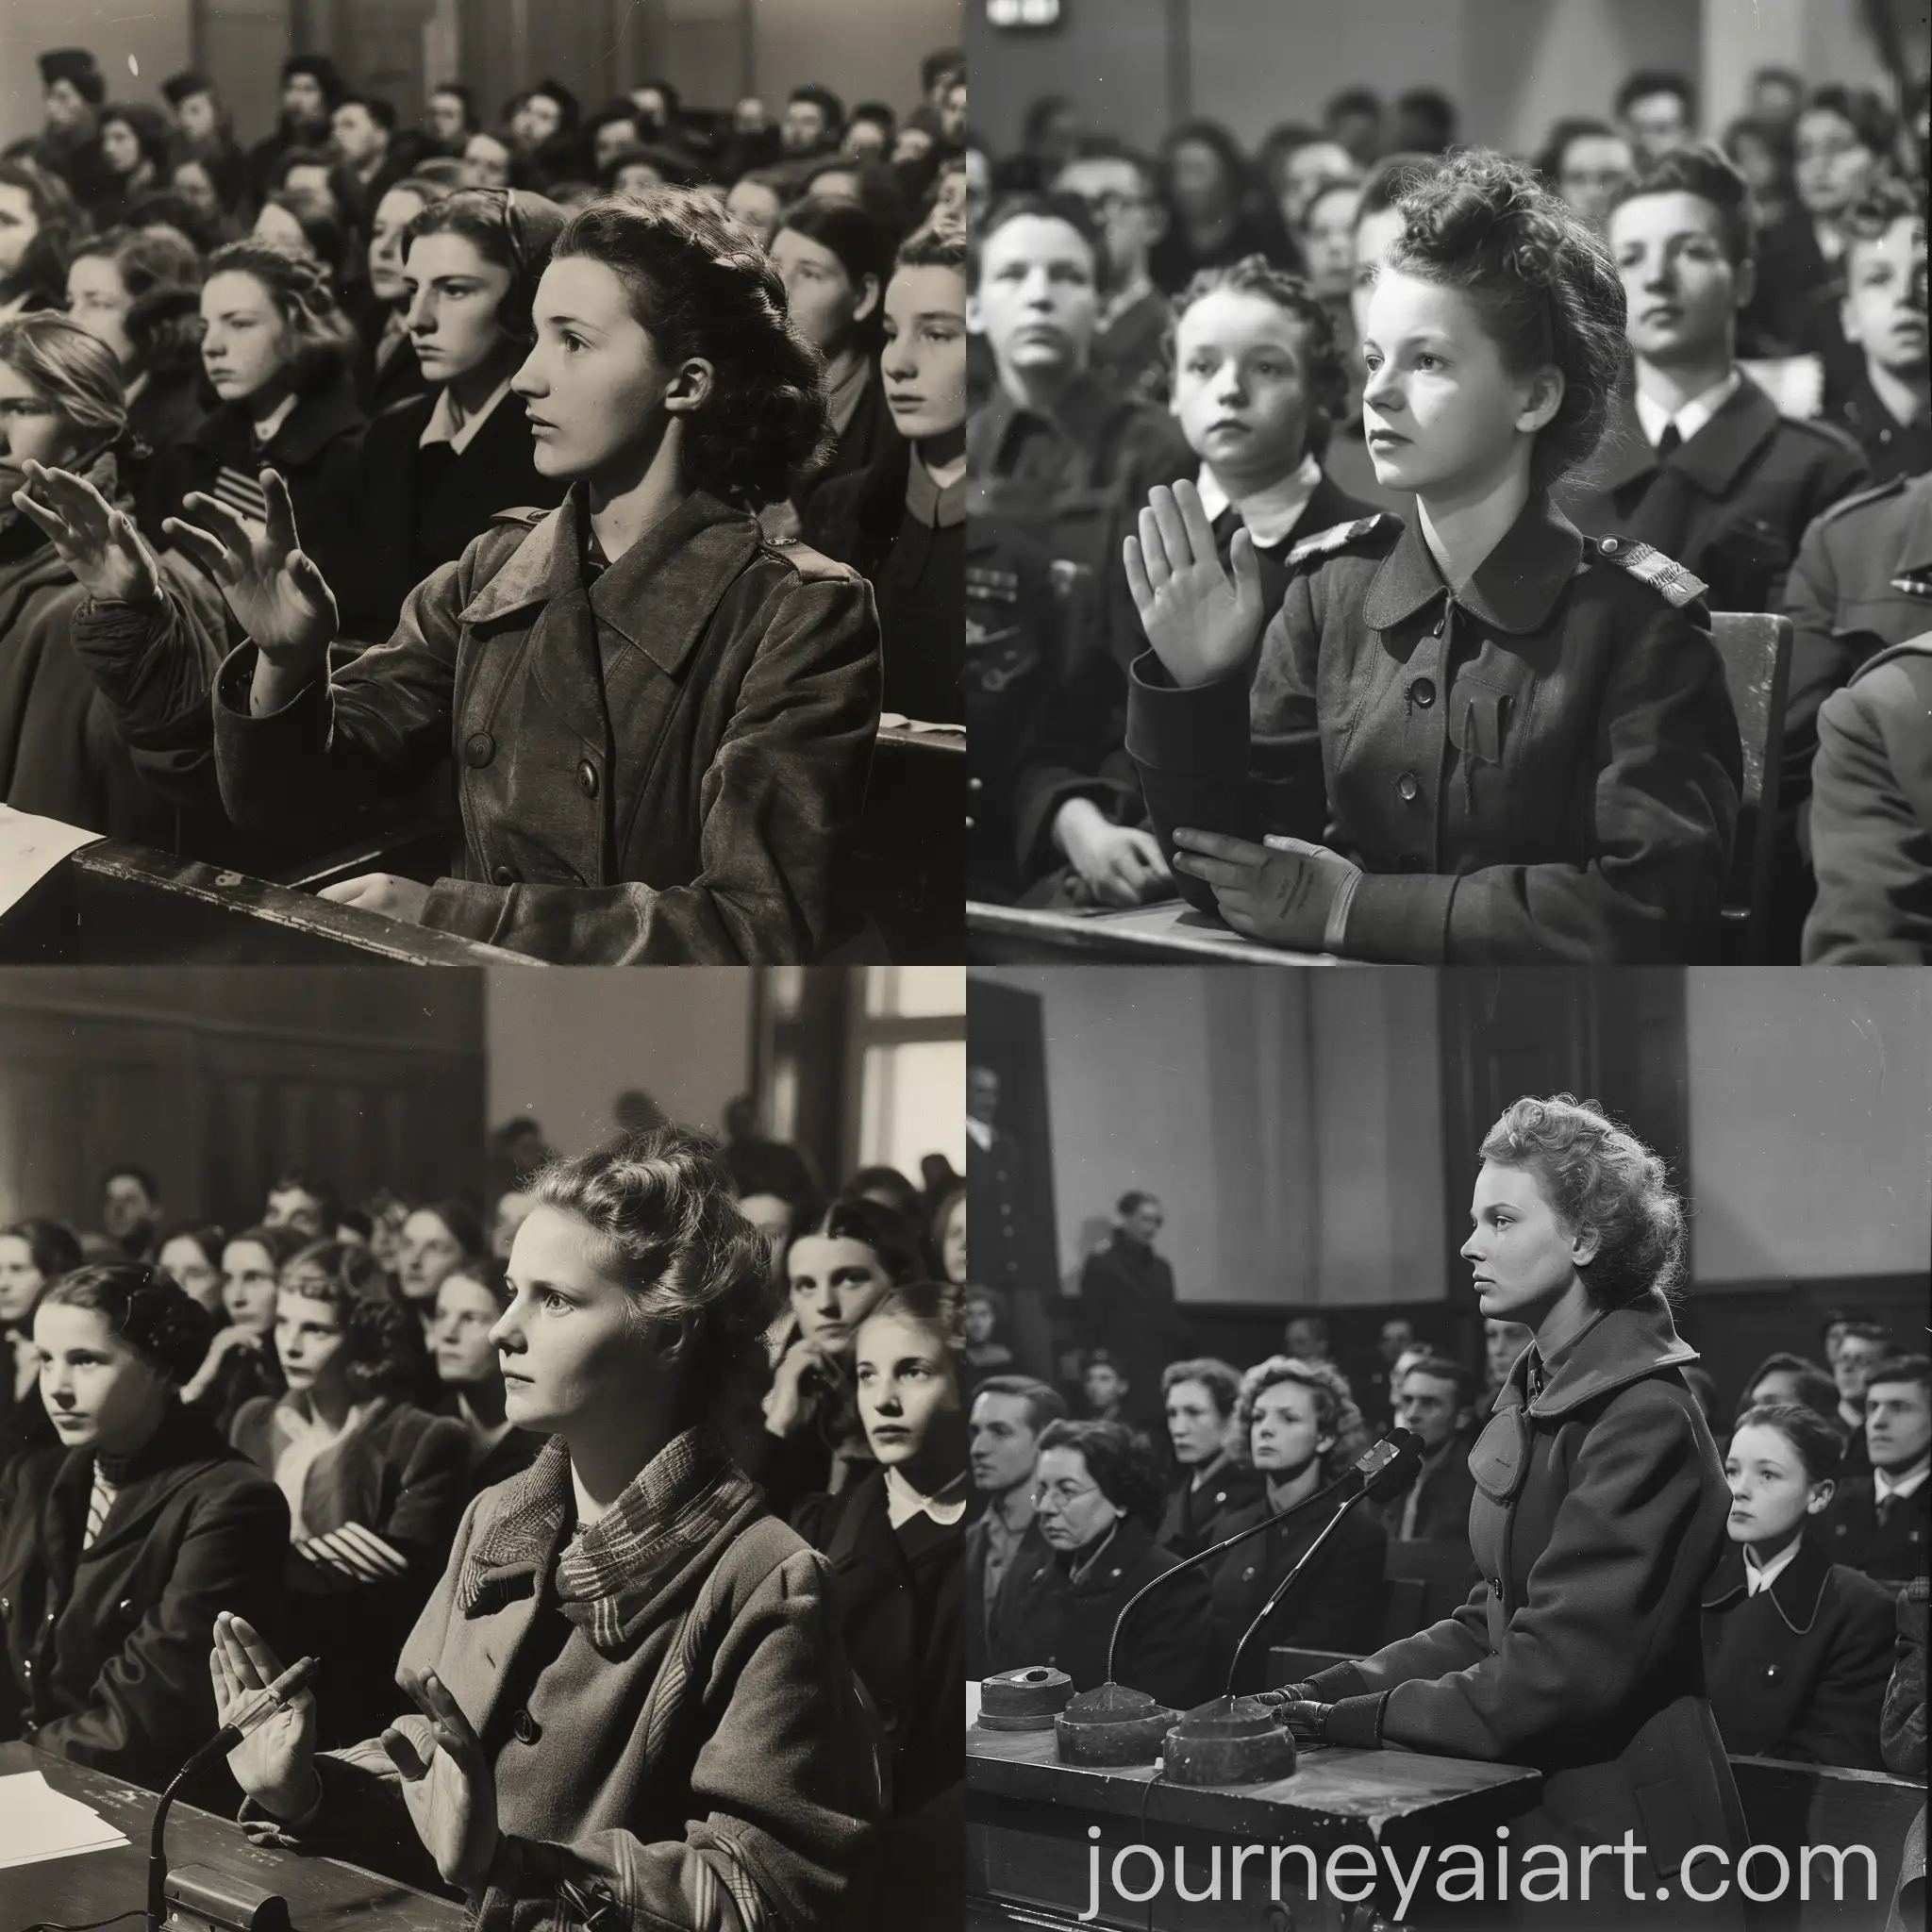 Historical-Photograph-of-a-Young-German-Woman-Swearing-Oath-at-Trial-1942